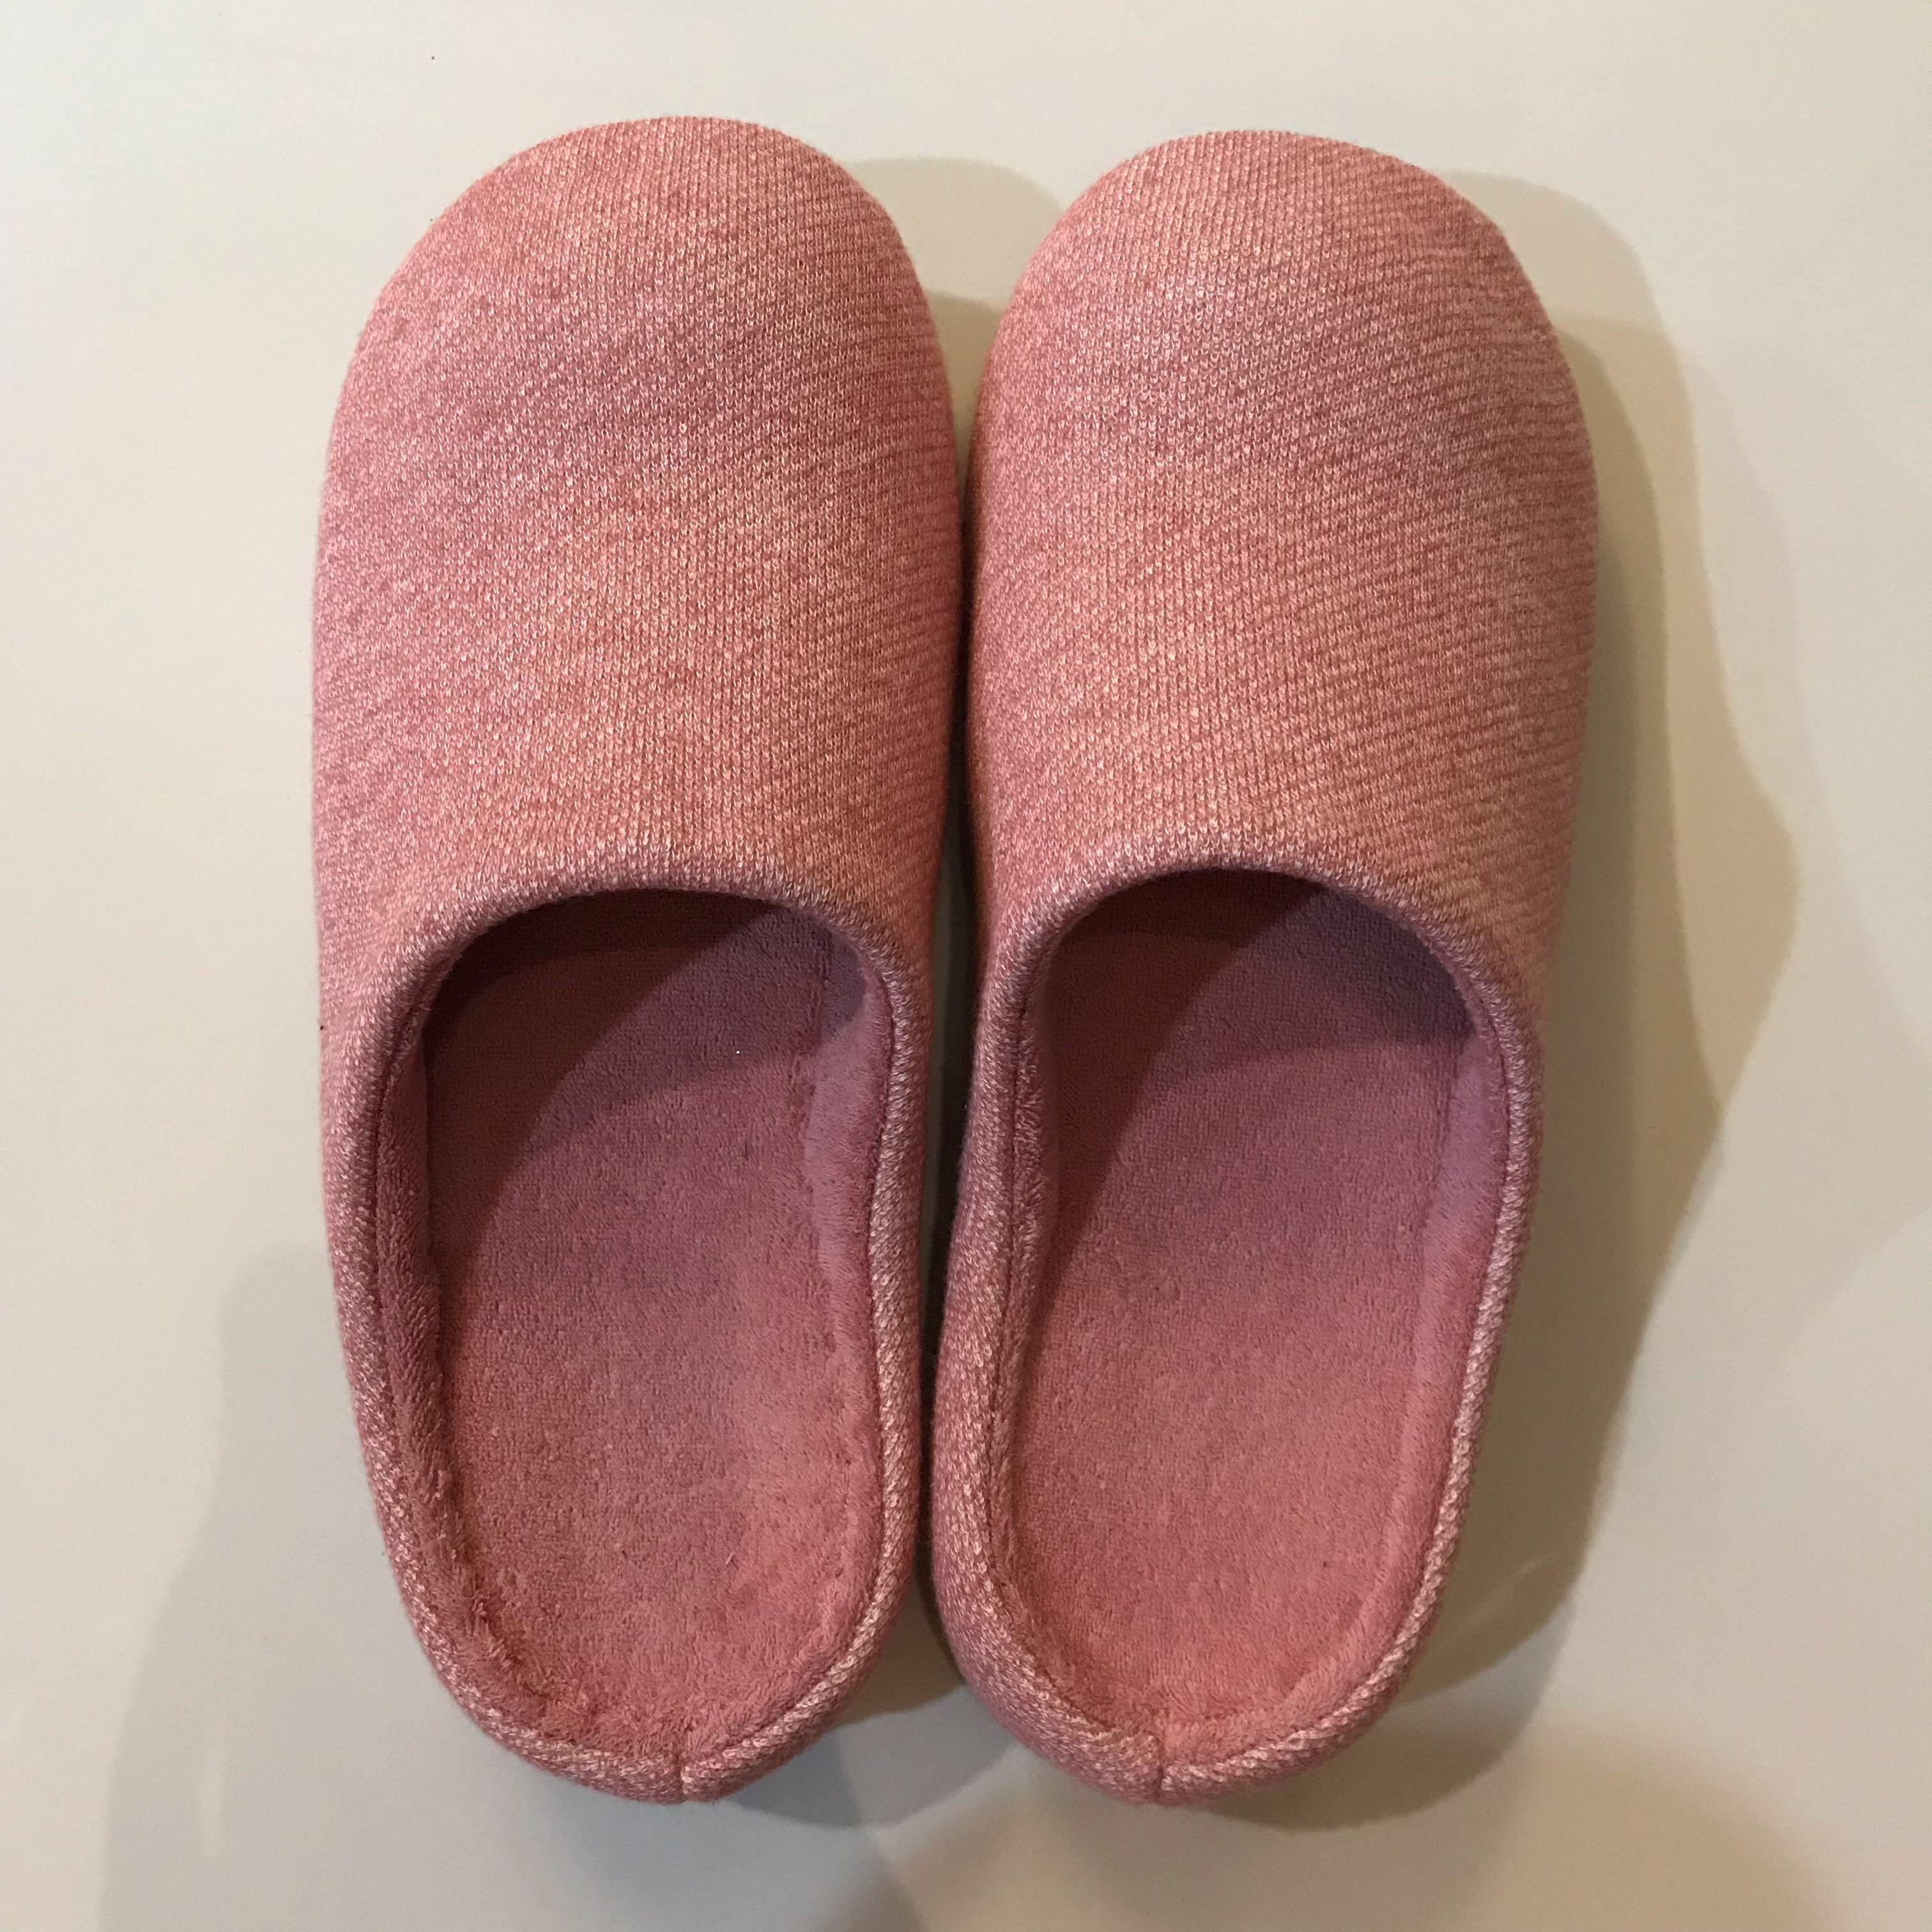 Uniqlo Room Shoes Bedroom Slippers Men S Fashion